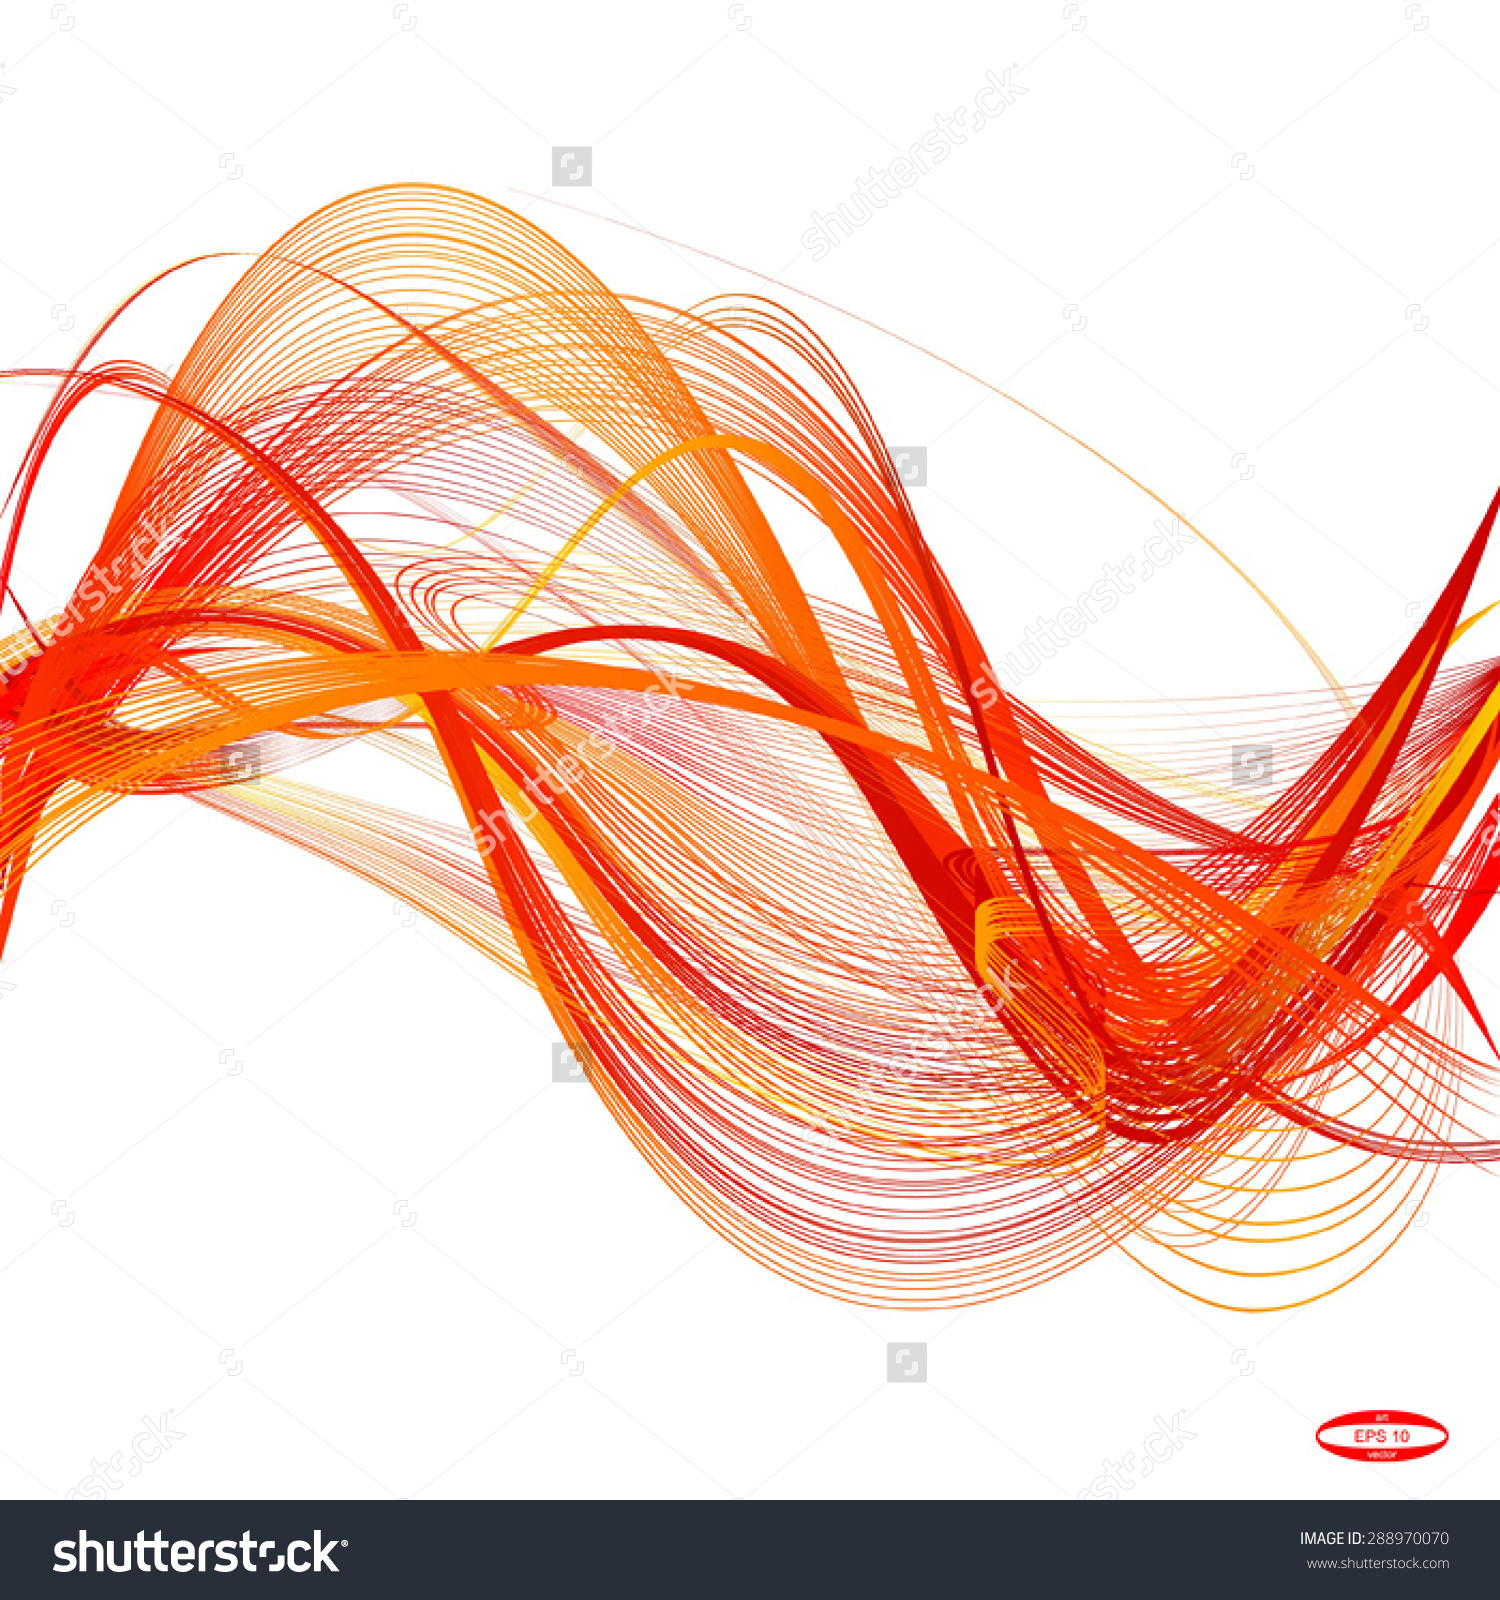 Abstract Red Line Orange Wave Yellow Stock Vector 288970070.